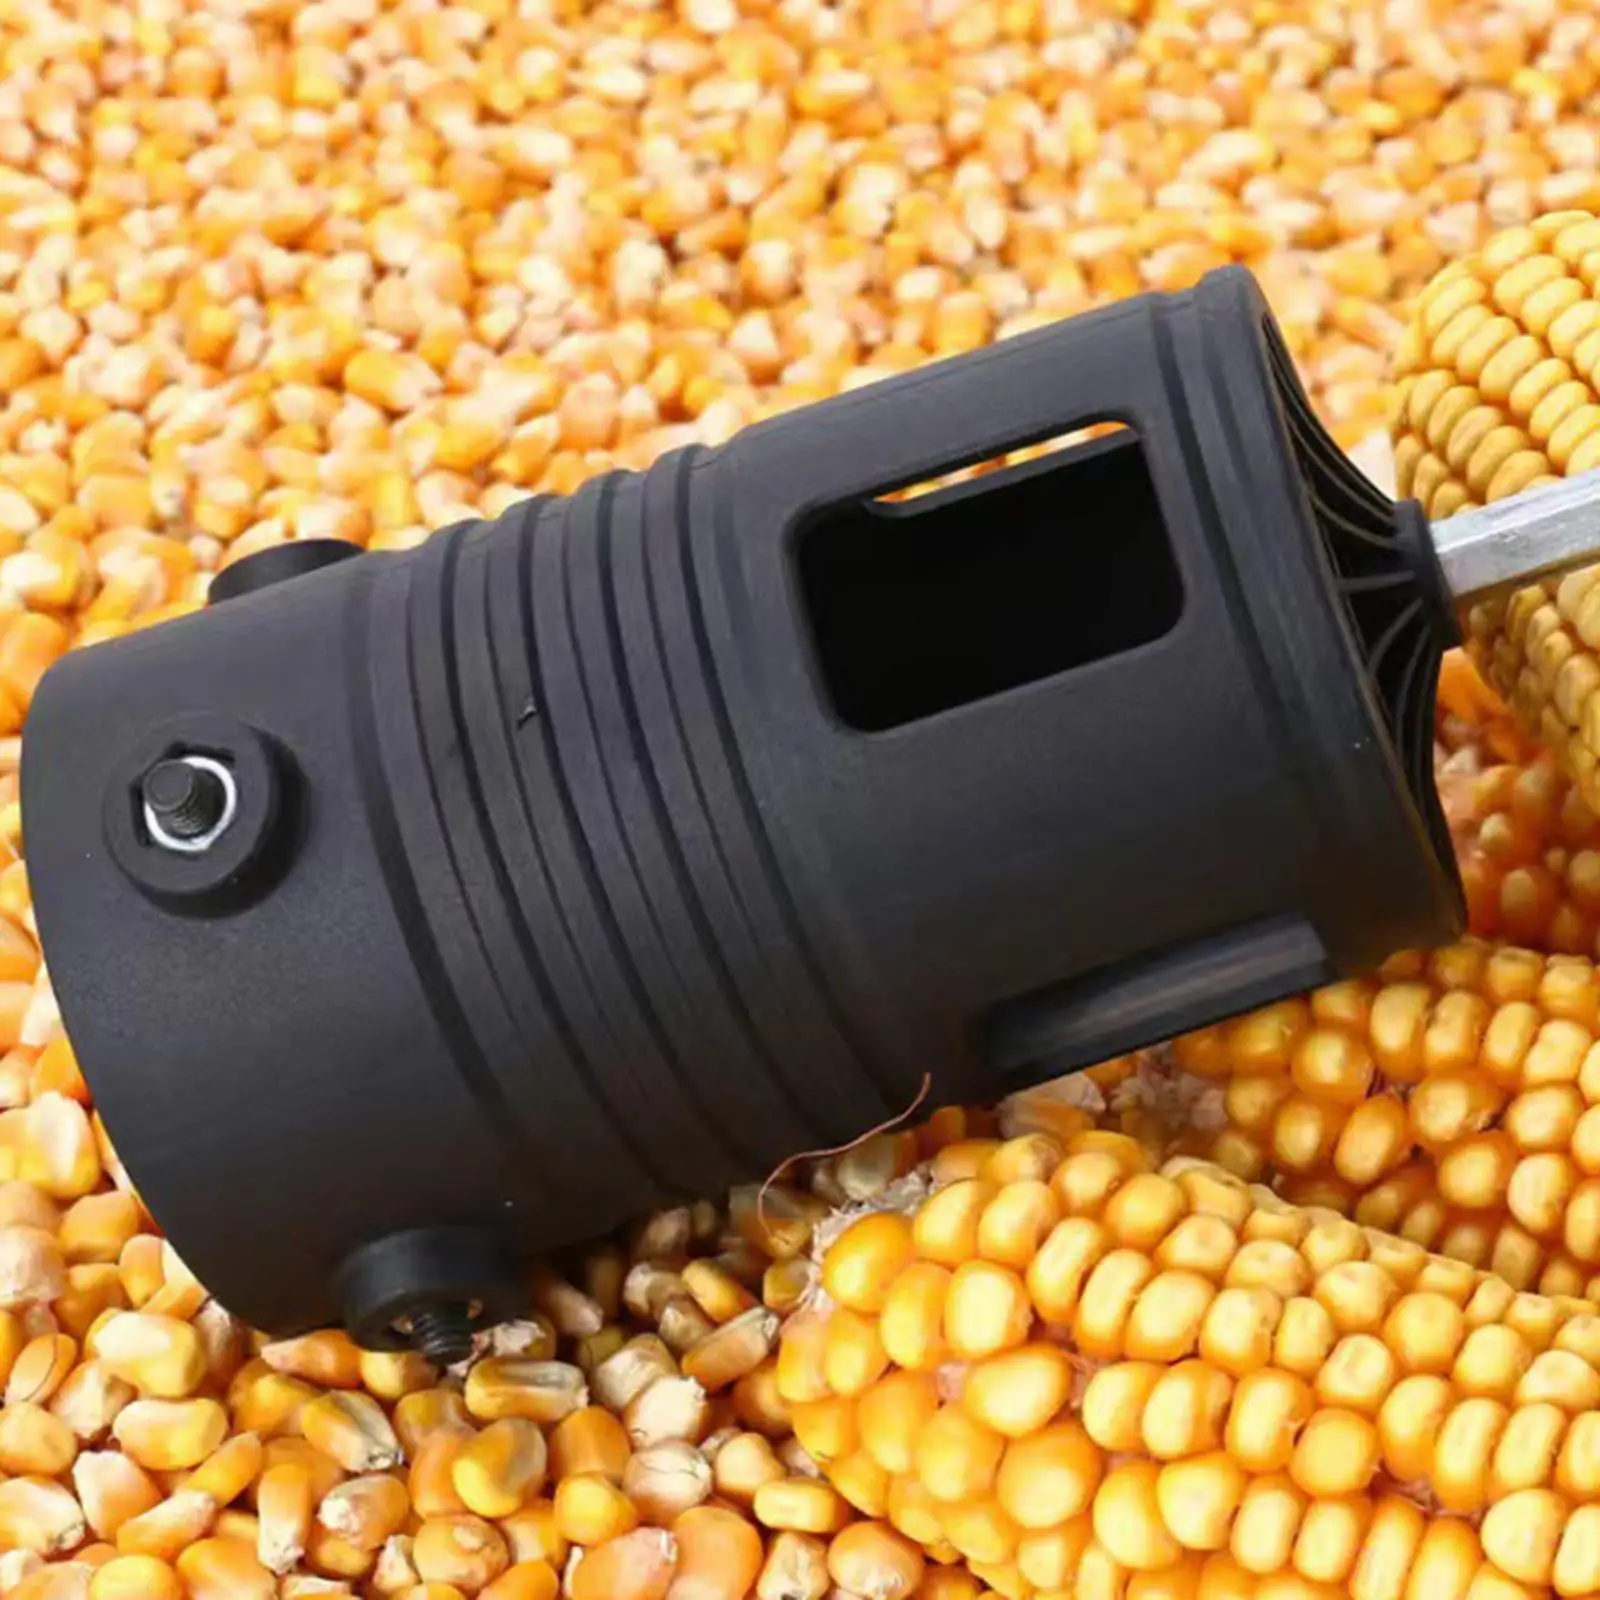 Corn Strip Thresher Hand Drill Portable Kernel Remover Corn Thresher Strip Tool for Farms Kitchen Families Home Restaurant